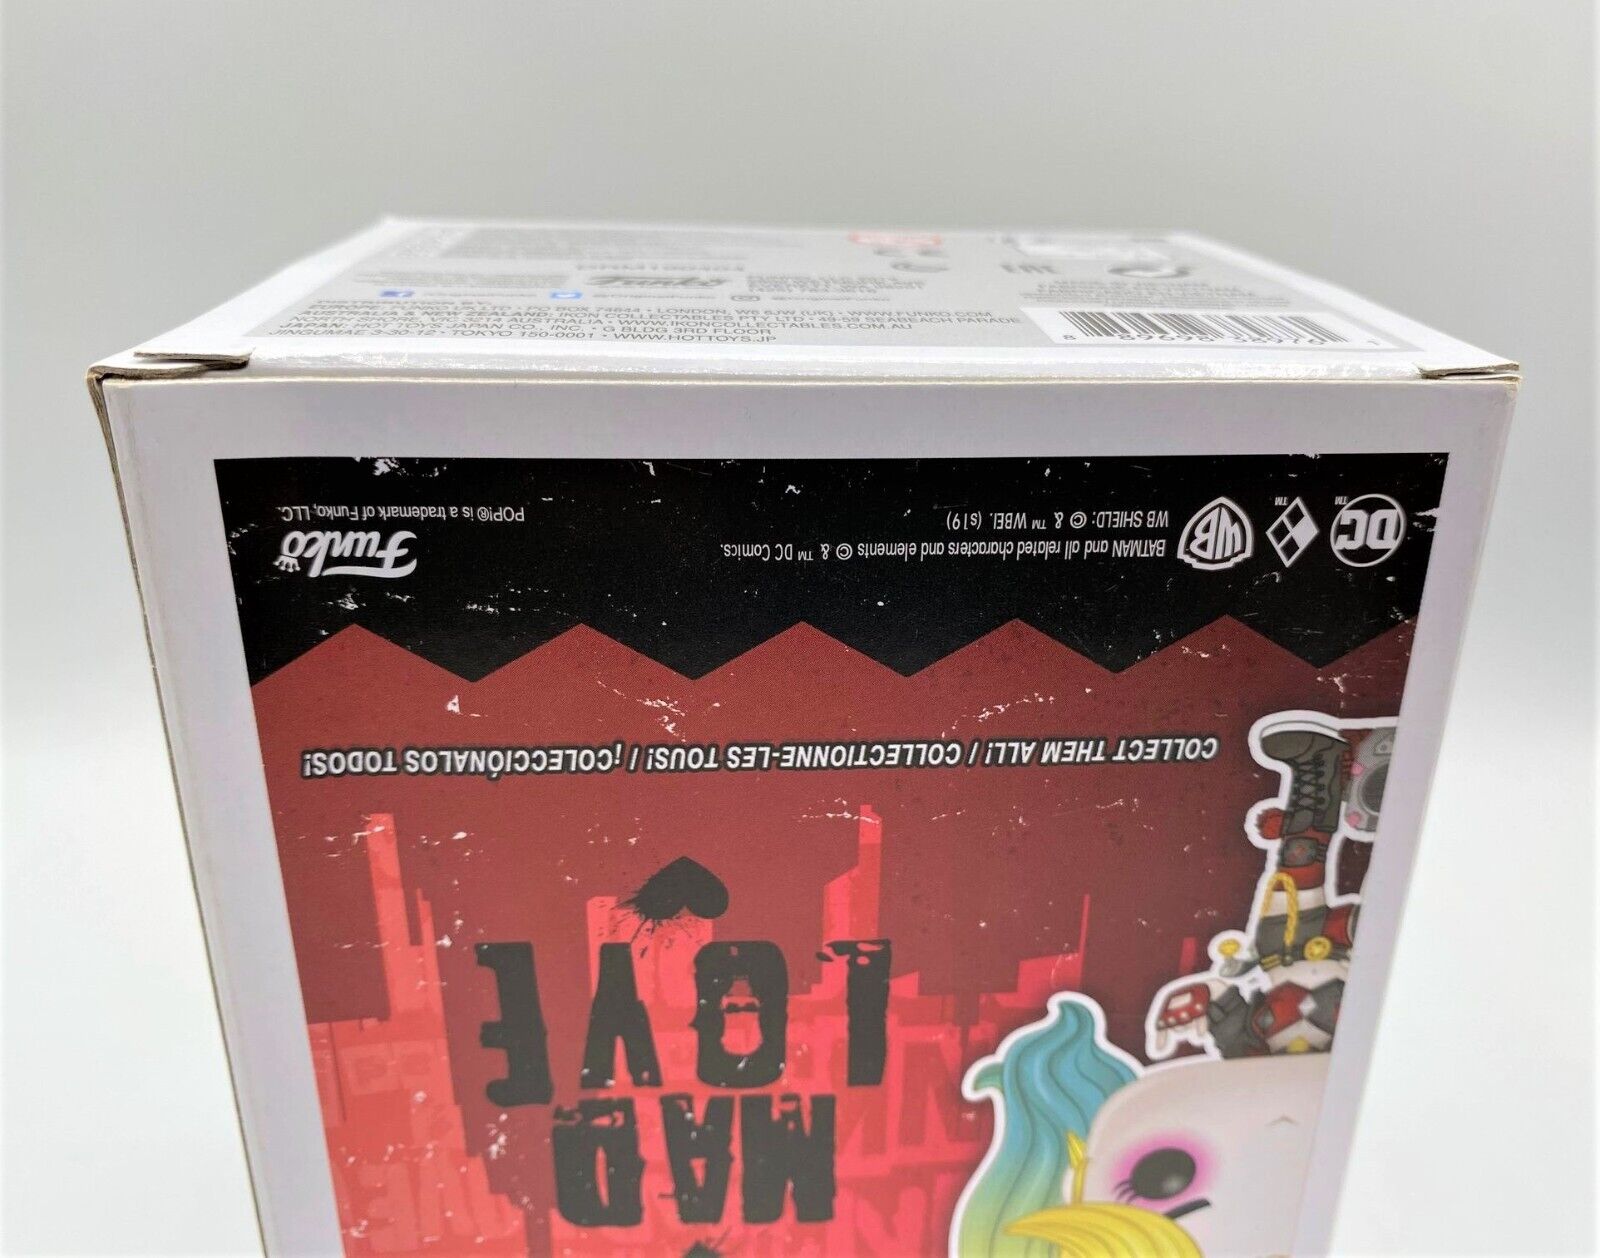 Funko POP! Harley Quinn DC Superheroes #279 Sealed PX Previews Exclusive –  Comics To Astonish, comics, magic cards, shop, Maryland